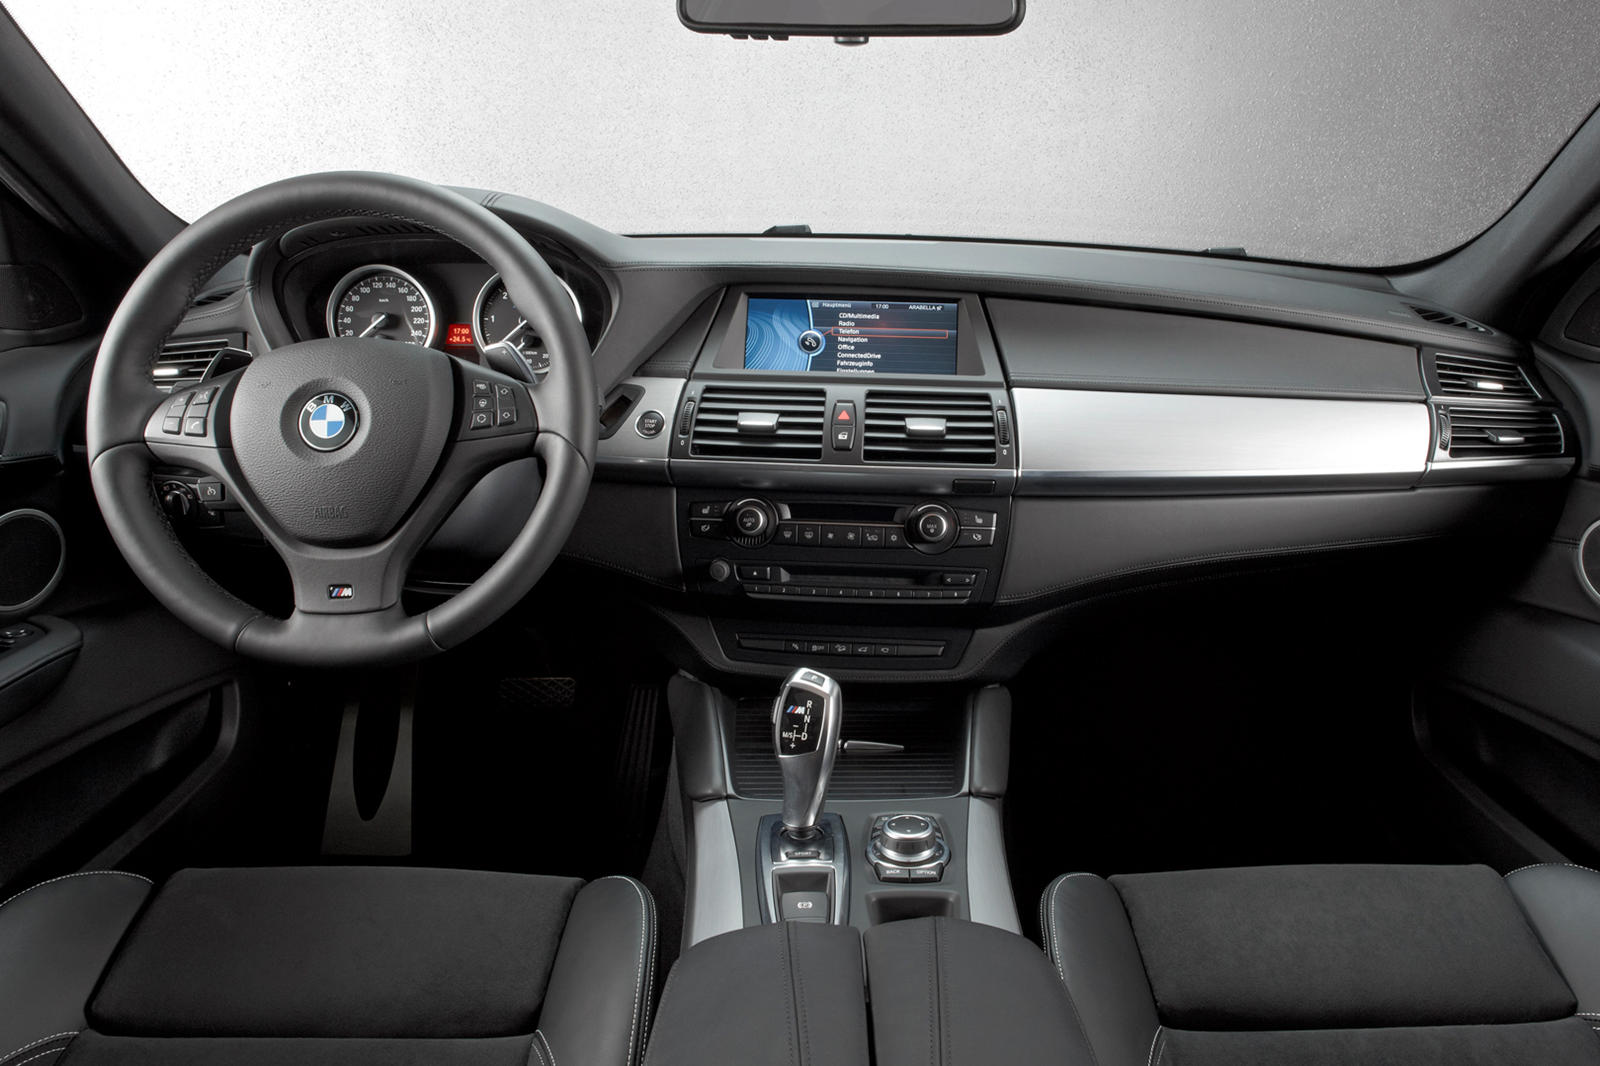 2014 BMW X6 Interior Review  Seating Infotainment Dashboard and Features   CarIndigocom